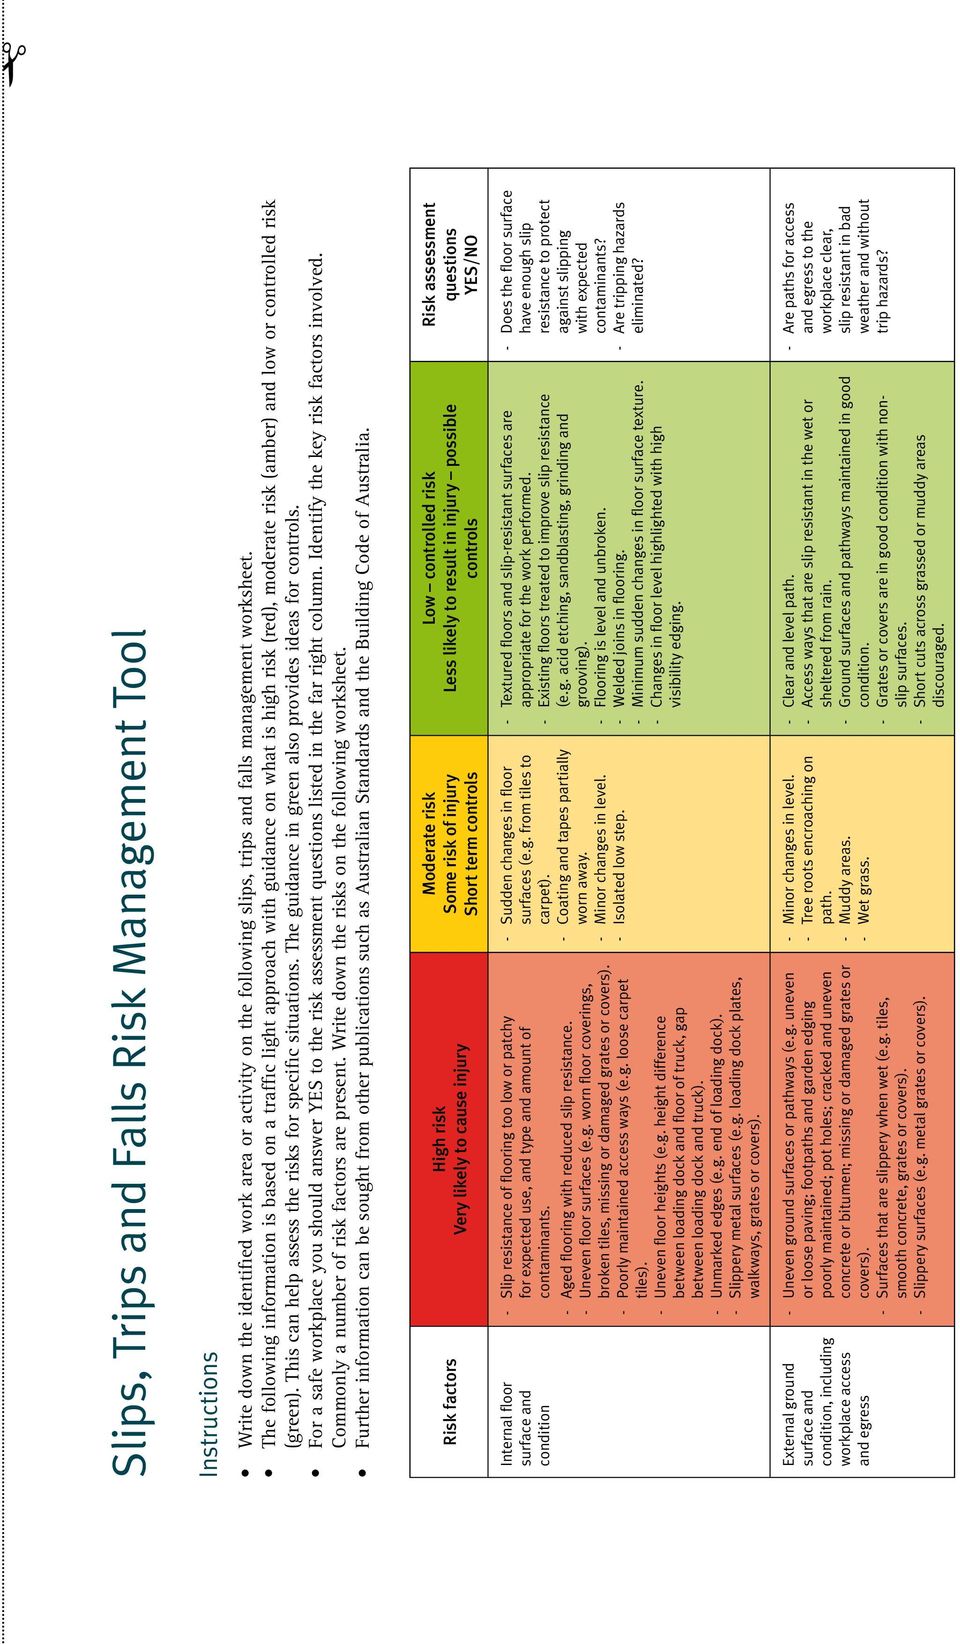 This can help assess the risks for specific situations. The guidance in green also provides ideas for controls.